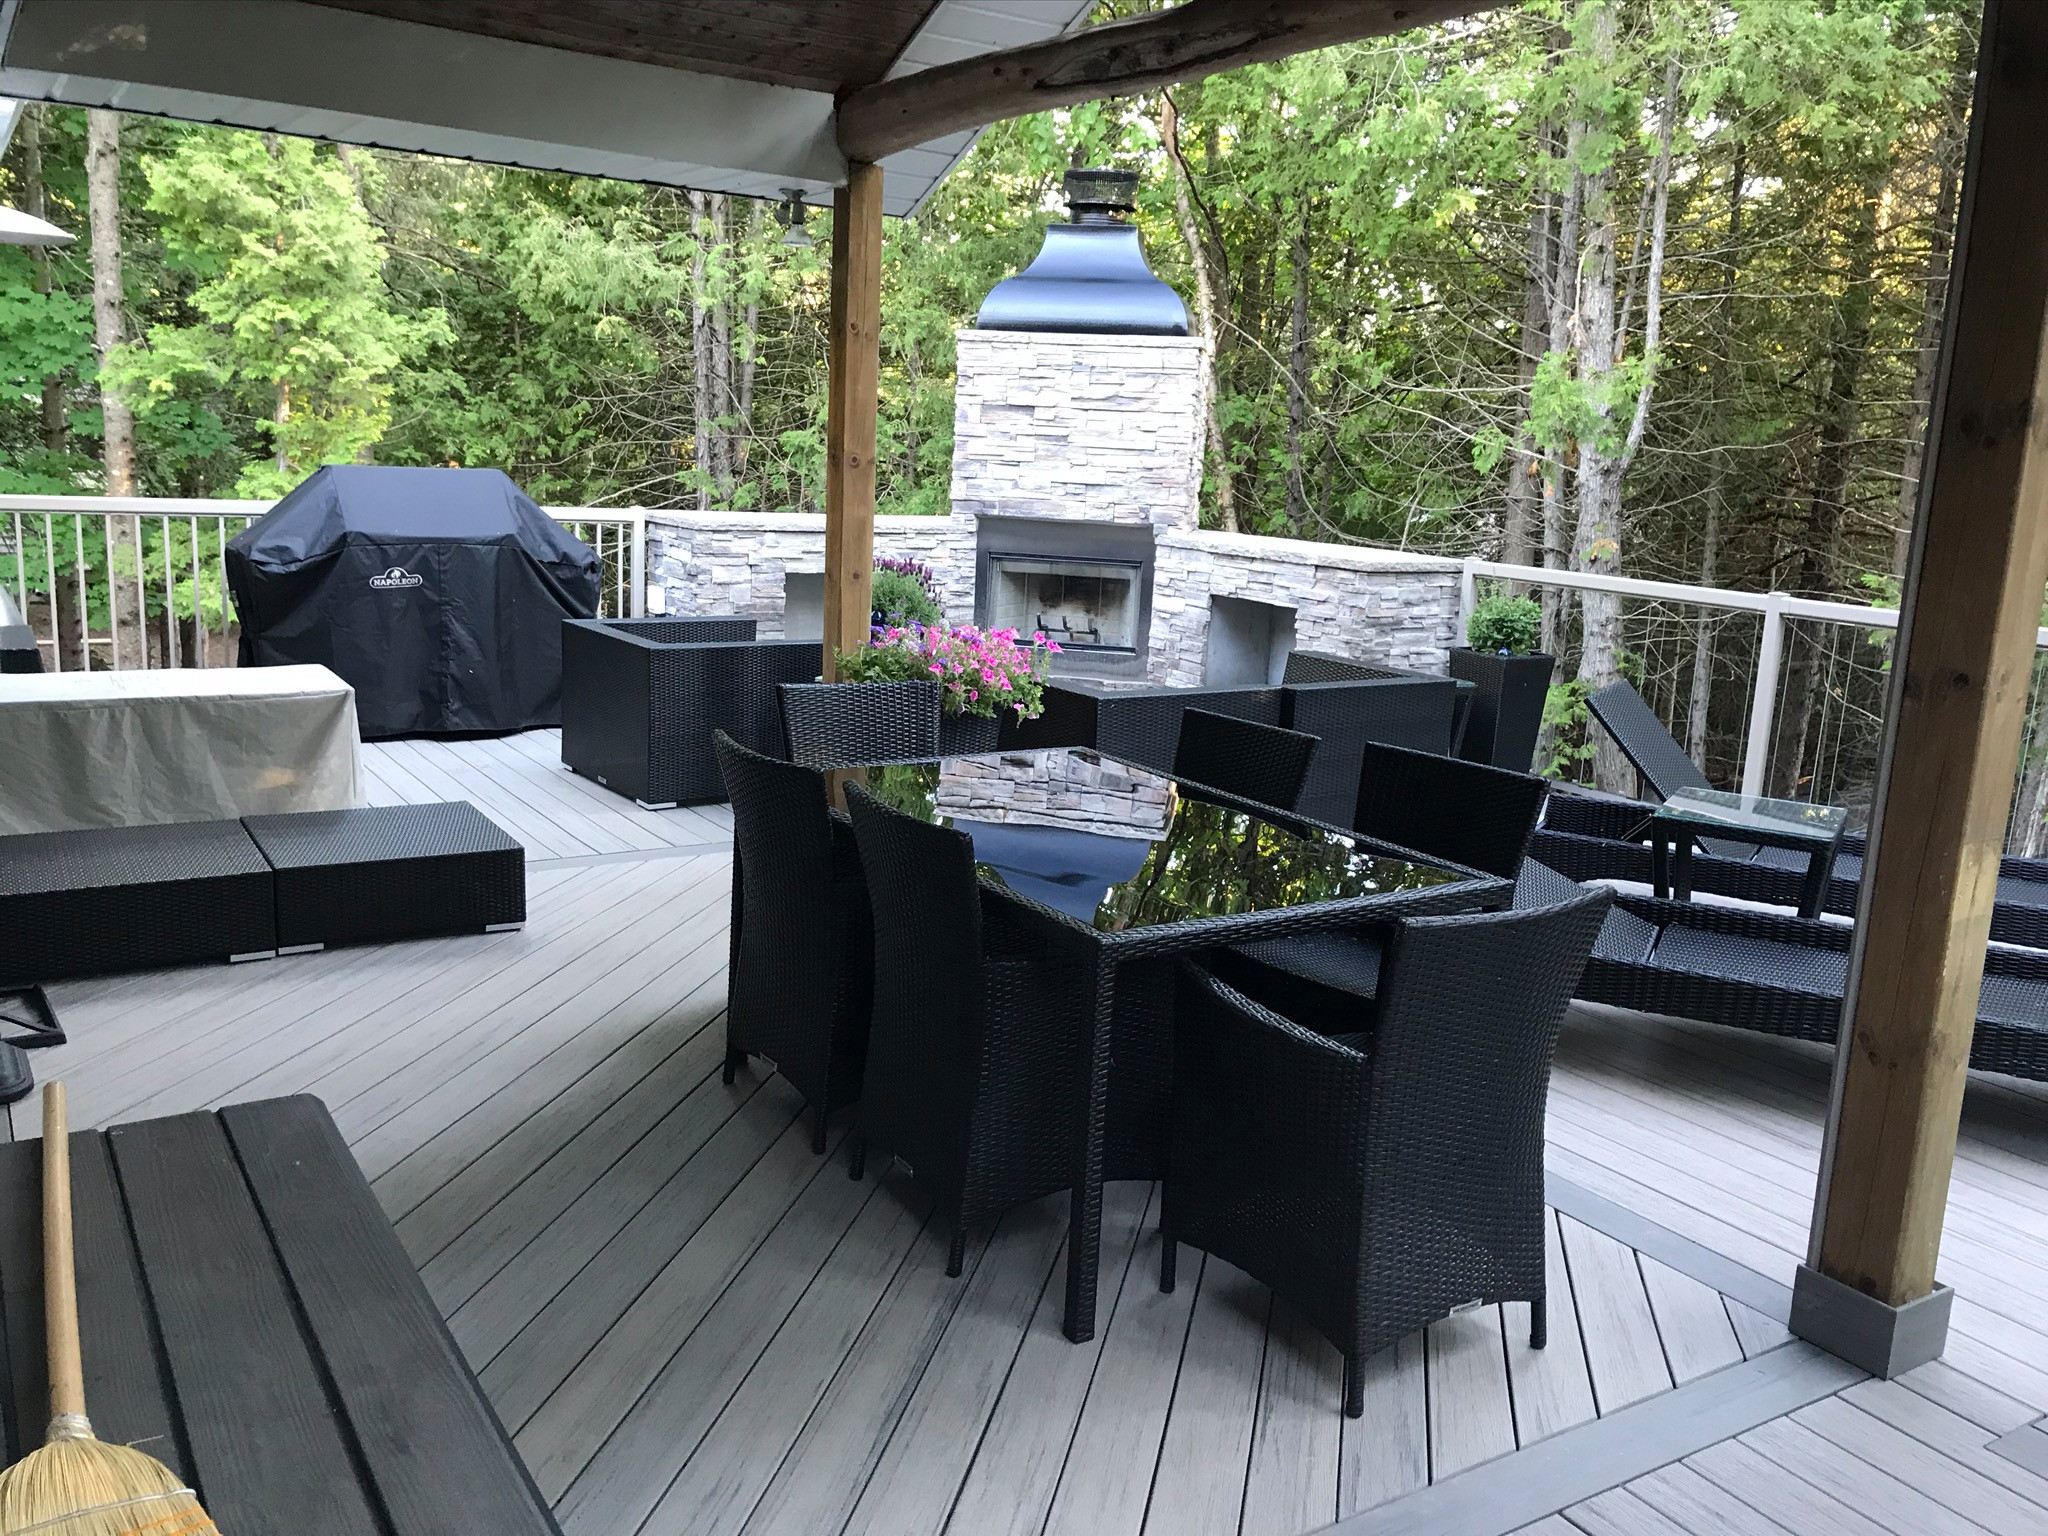 This composite deck provides a maintenance free outdoor living space complete with a fireplace and dining area. This deck doubles as a front entrance, that is if you don't get caught up enjoying the w